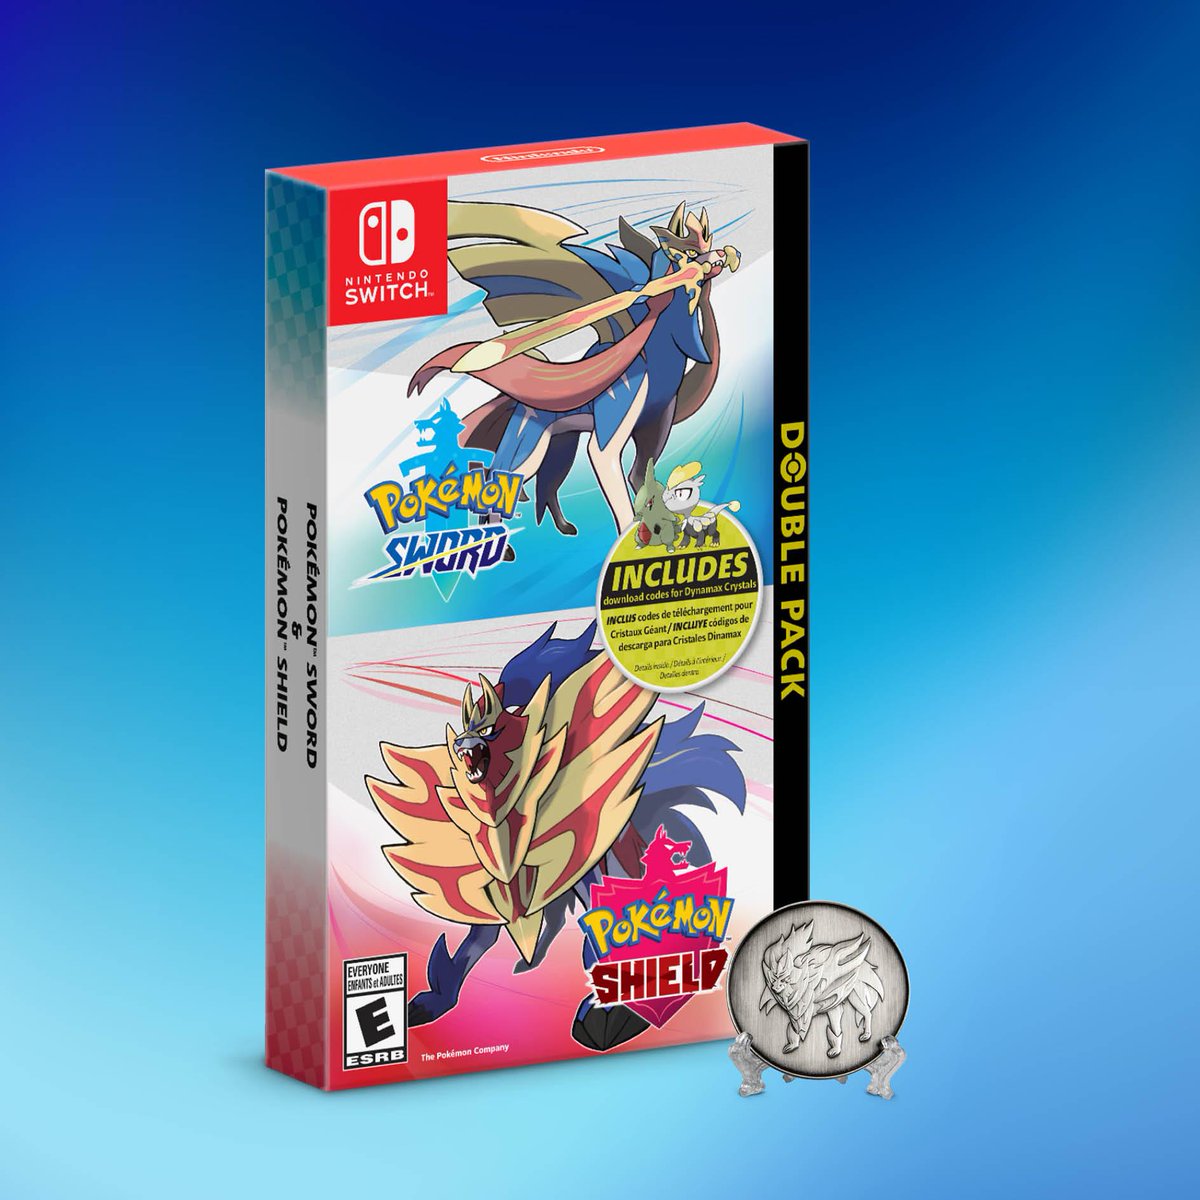 Pokemon Images: Pokemon Sword And Shield Double Pack Codes Not Working